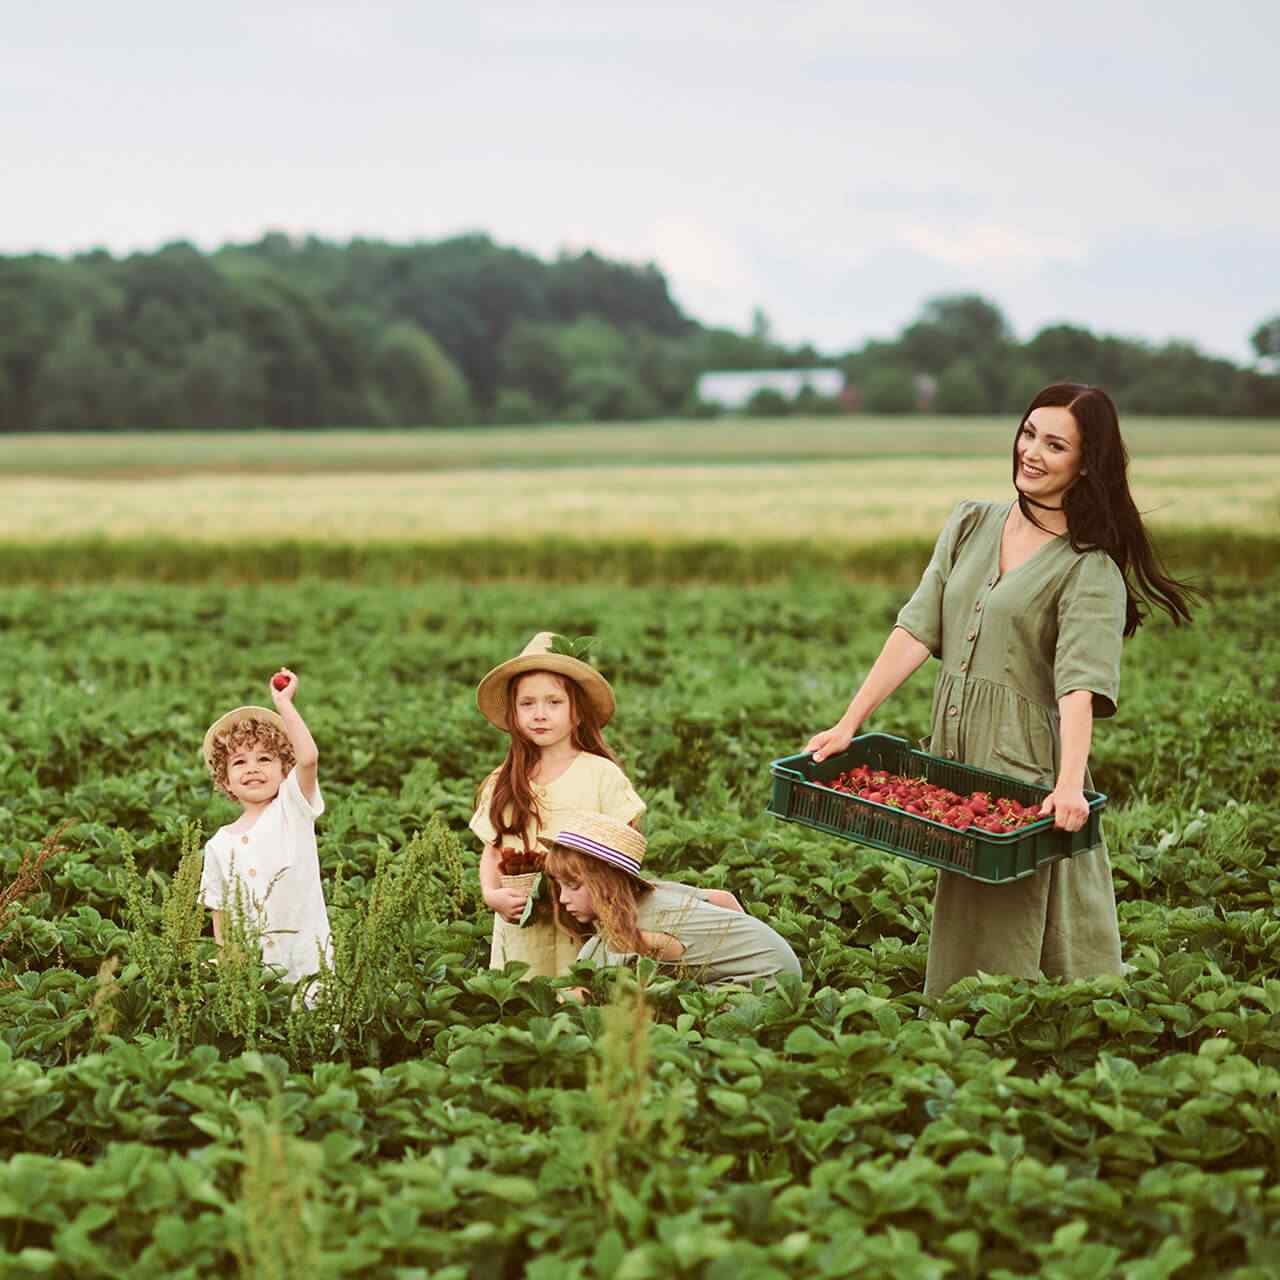 Food production that’s sustainable for families